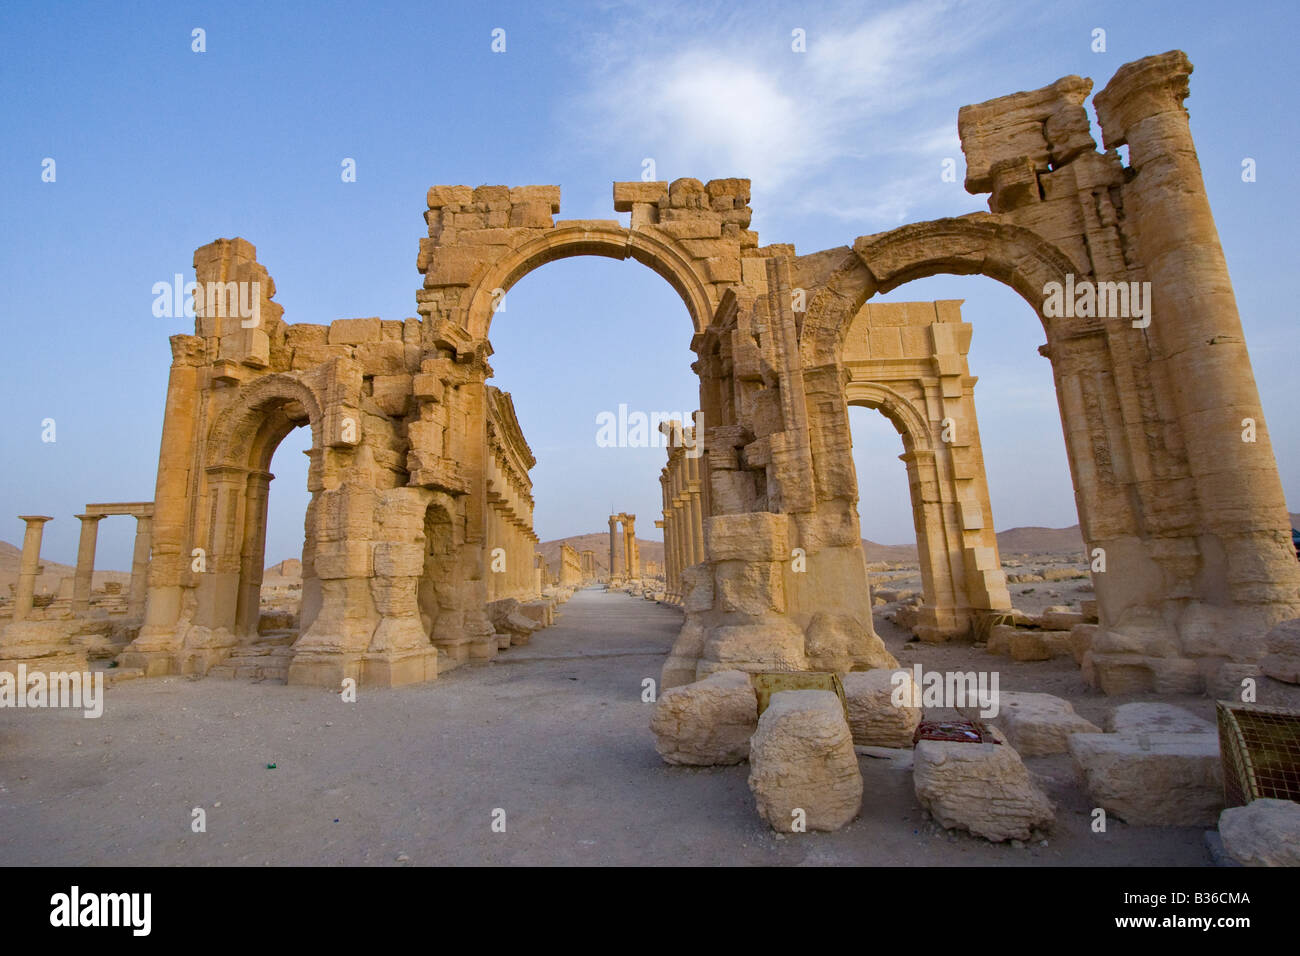 Monumental Arch in the Roman Ruins of Palmyra in Syria Stock Photo